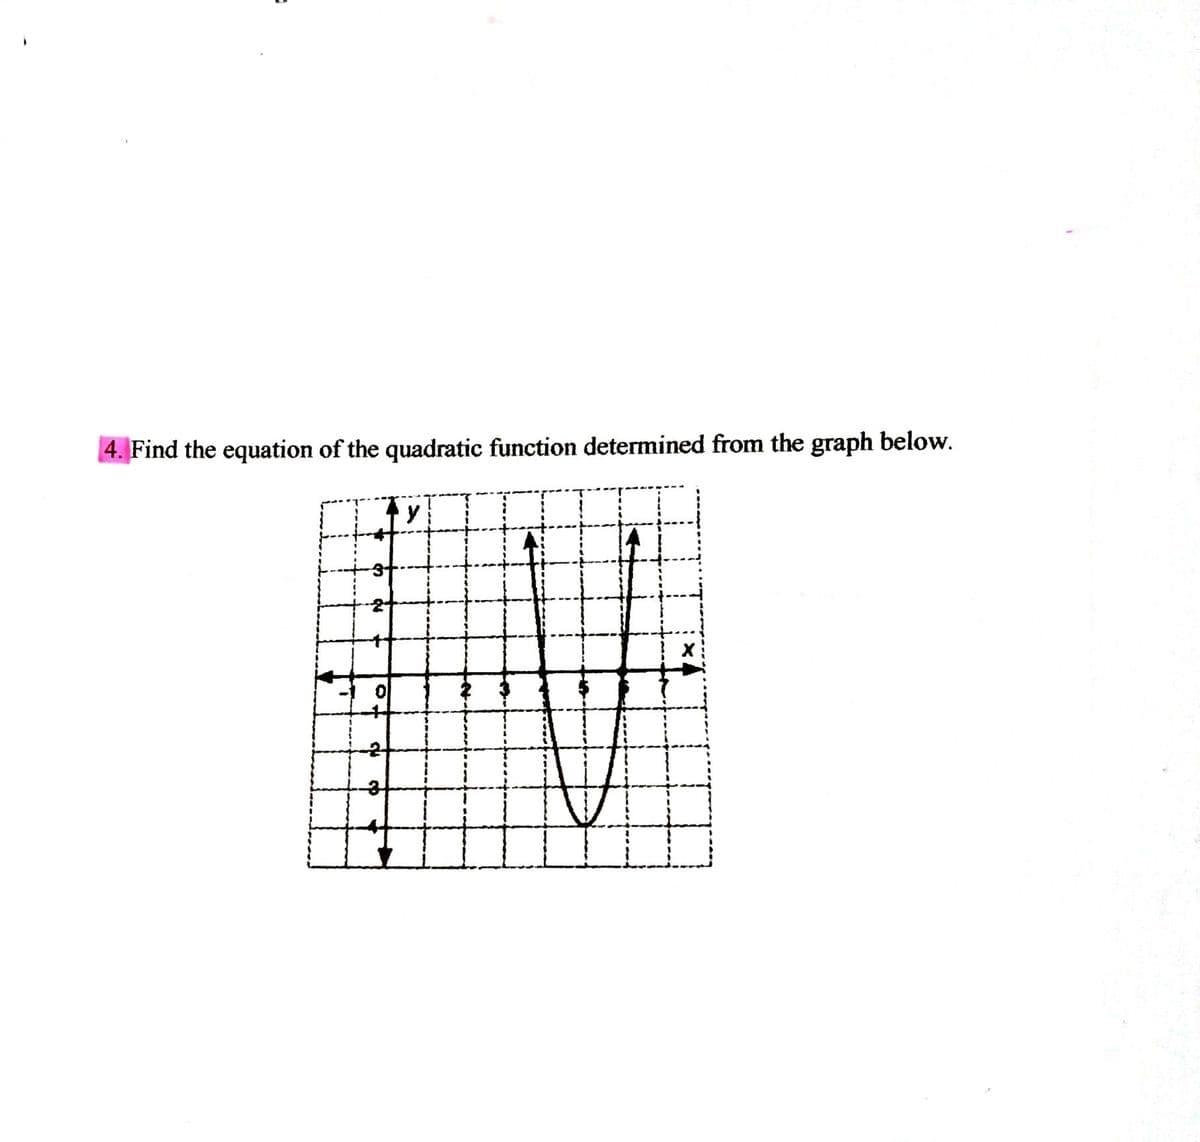 4. Find the equation of the quadratic function determined from the graph below.
y
